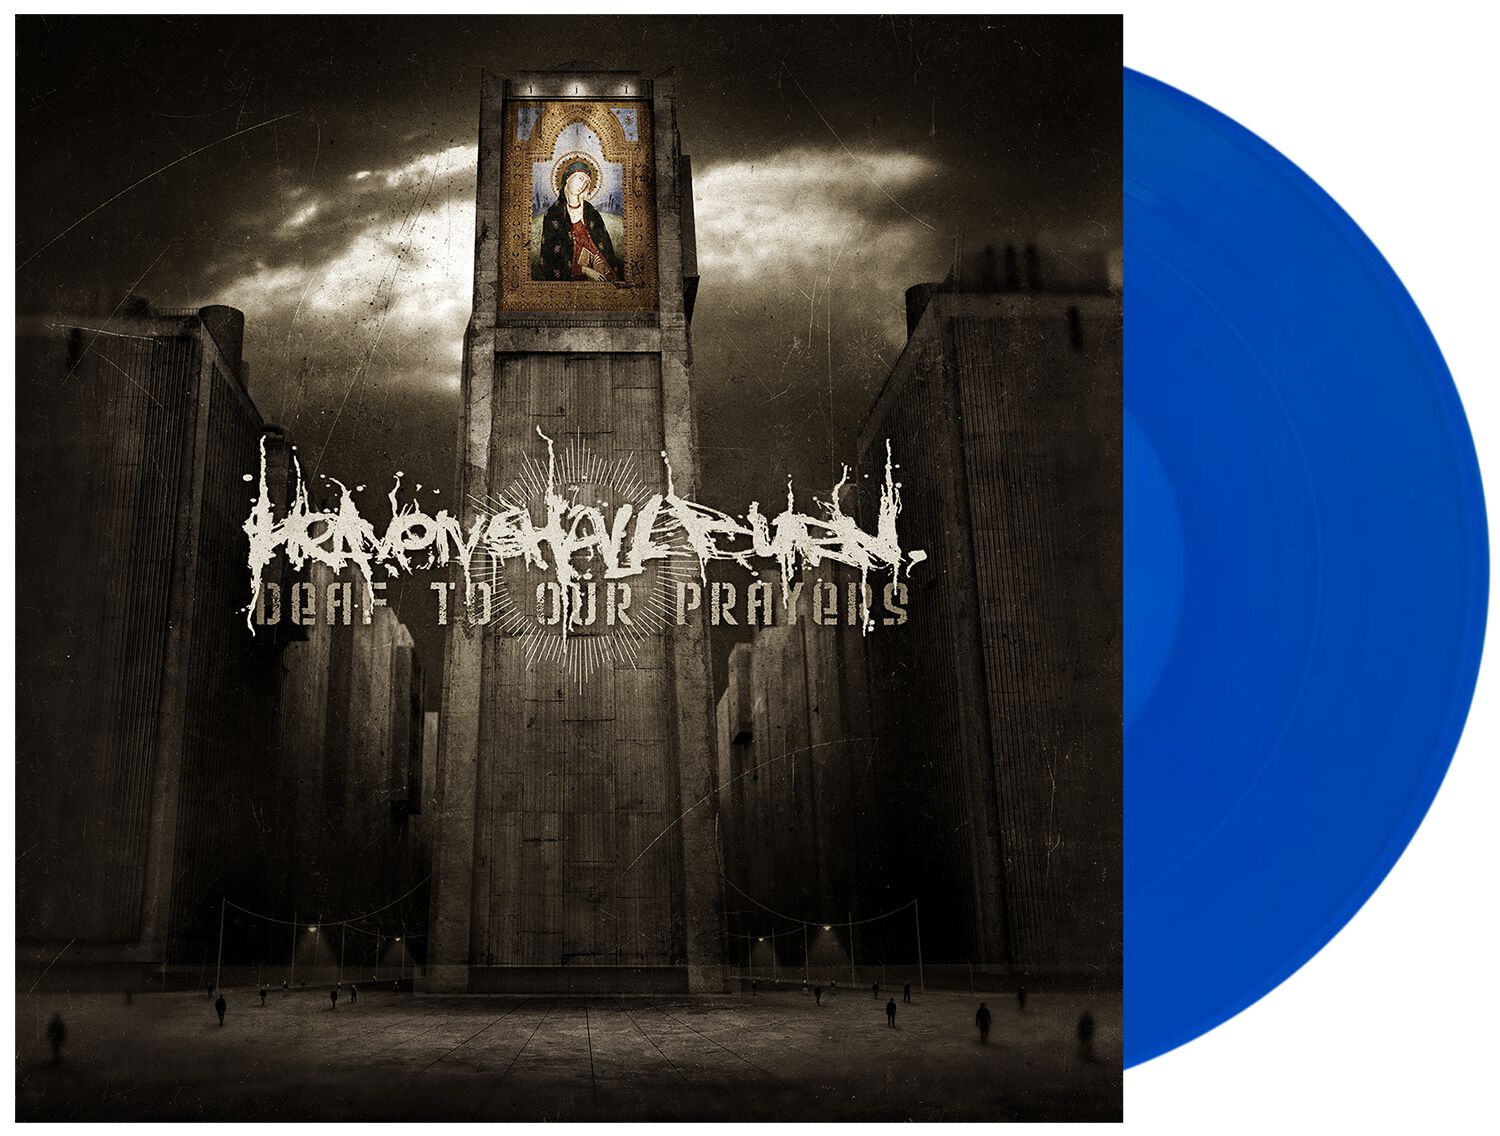 Image of Heaven Shall Burn Deaf to our prayers LP farbig